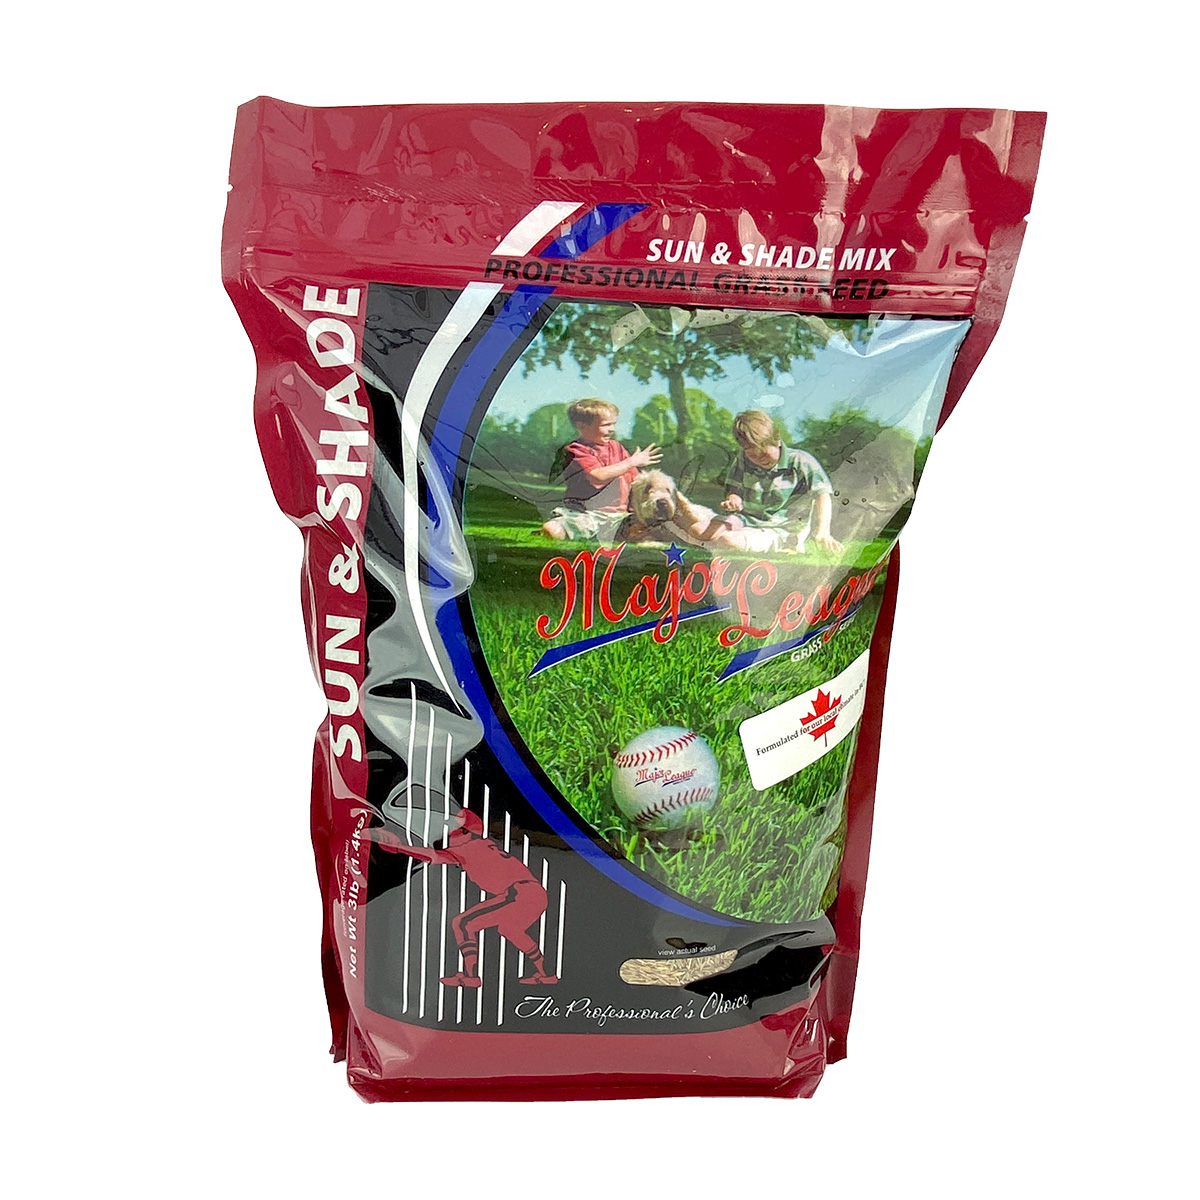 Major League Grass Seed Sun and Shade Mix 1.4kg